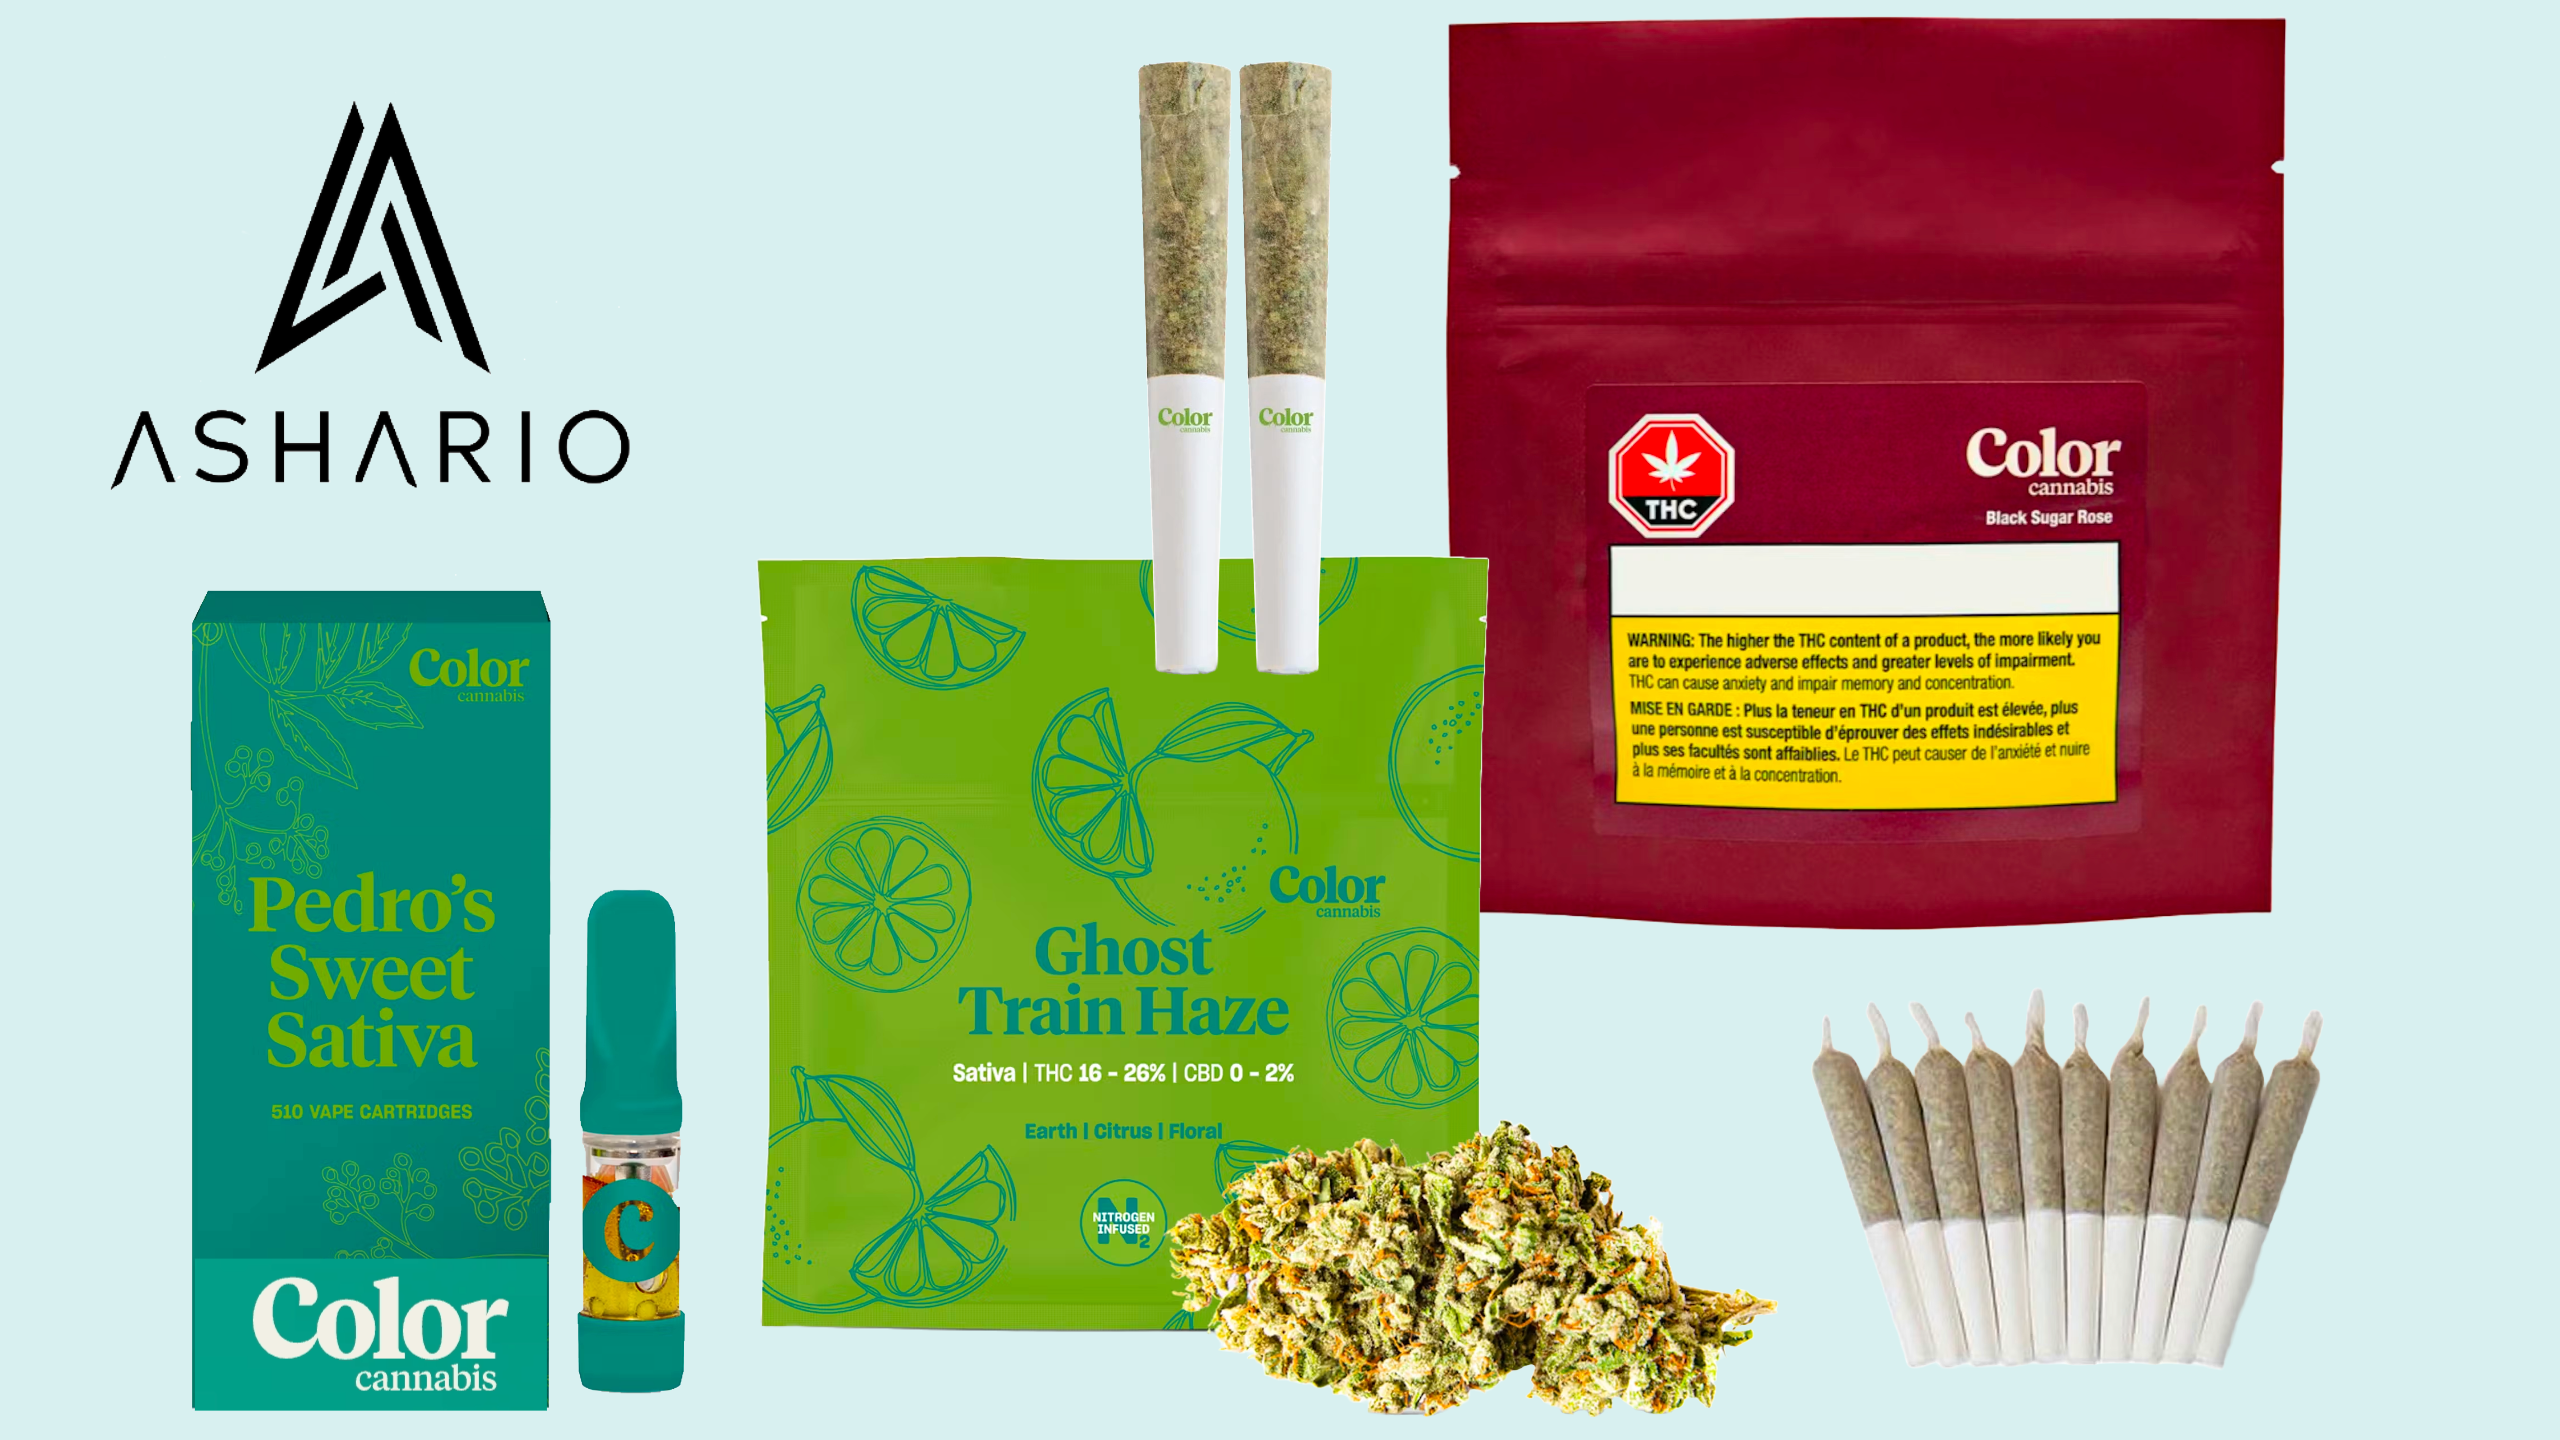 Experience the enchantment of Color Cannabis, a visionary brand showcased at Ashario Cannabis.